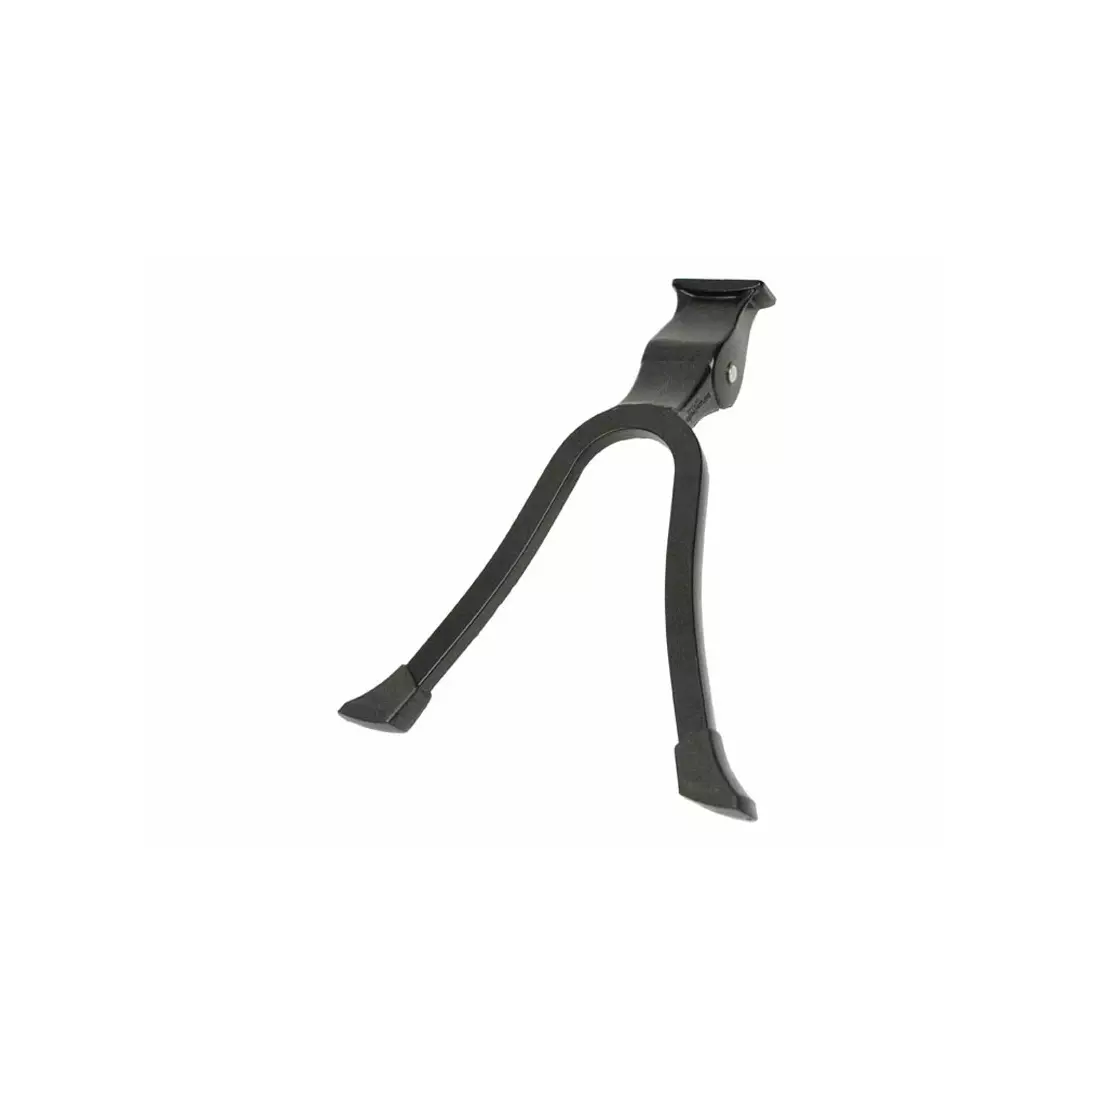 ATRANVELO central bicycle stand moove double 290mm aluminum black ATR-1250-4120-290